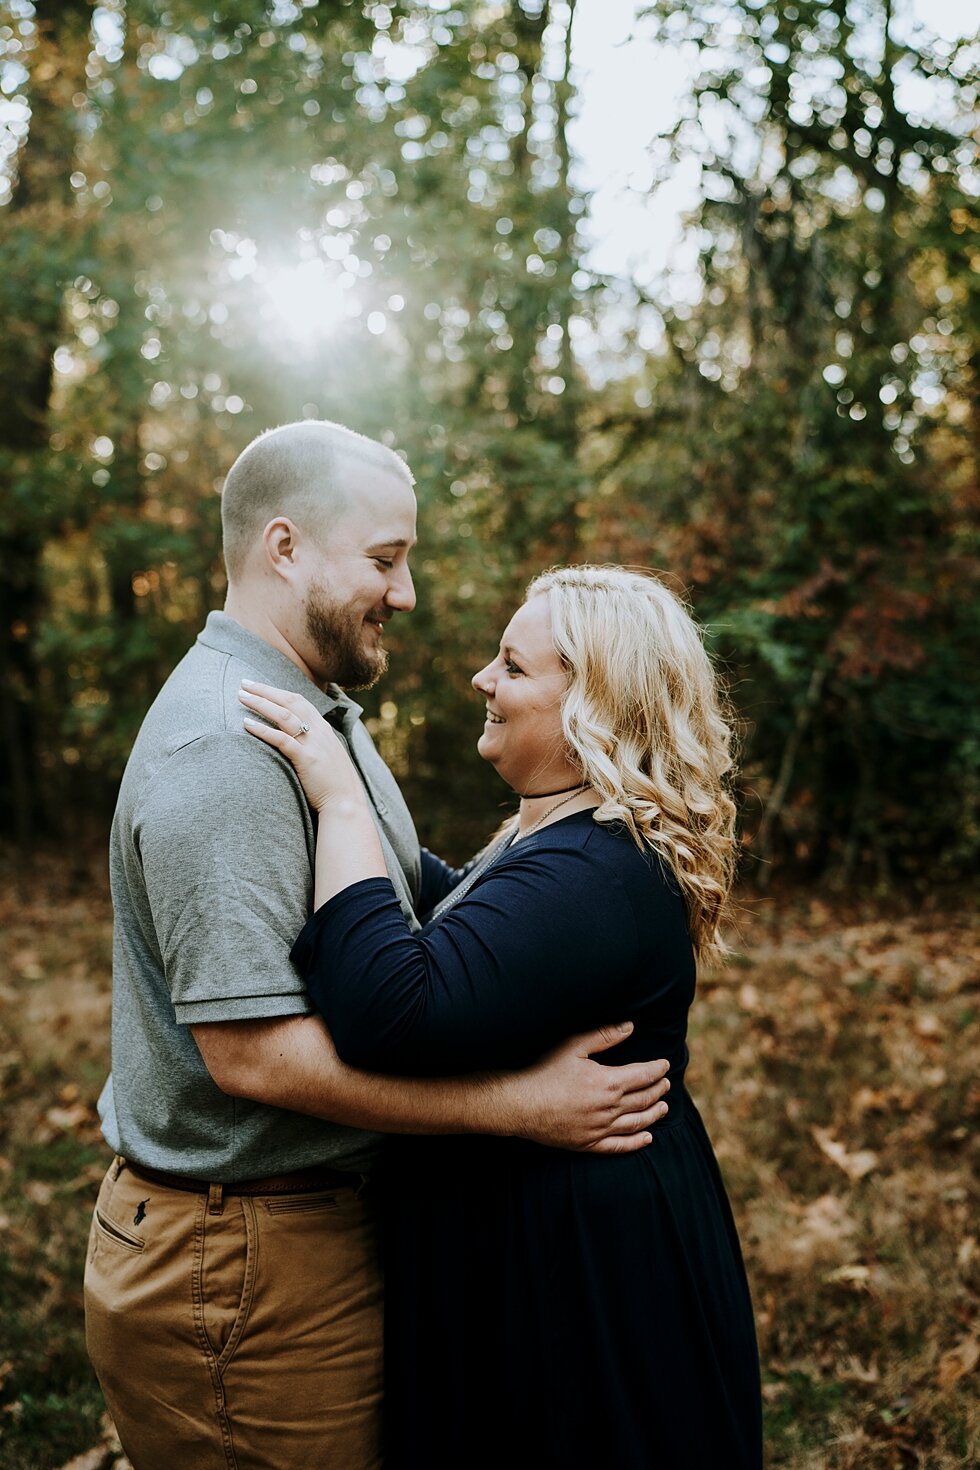  Looking deep into each others eyes #engagementgoals #engagementphotographer #engaged #outdoorengagement #kentuckyphotographer #indianaphotographer #louisvillephotographer #engagementphotos #savethedatephotos #savethedates #engagementphotography #pho